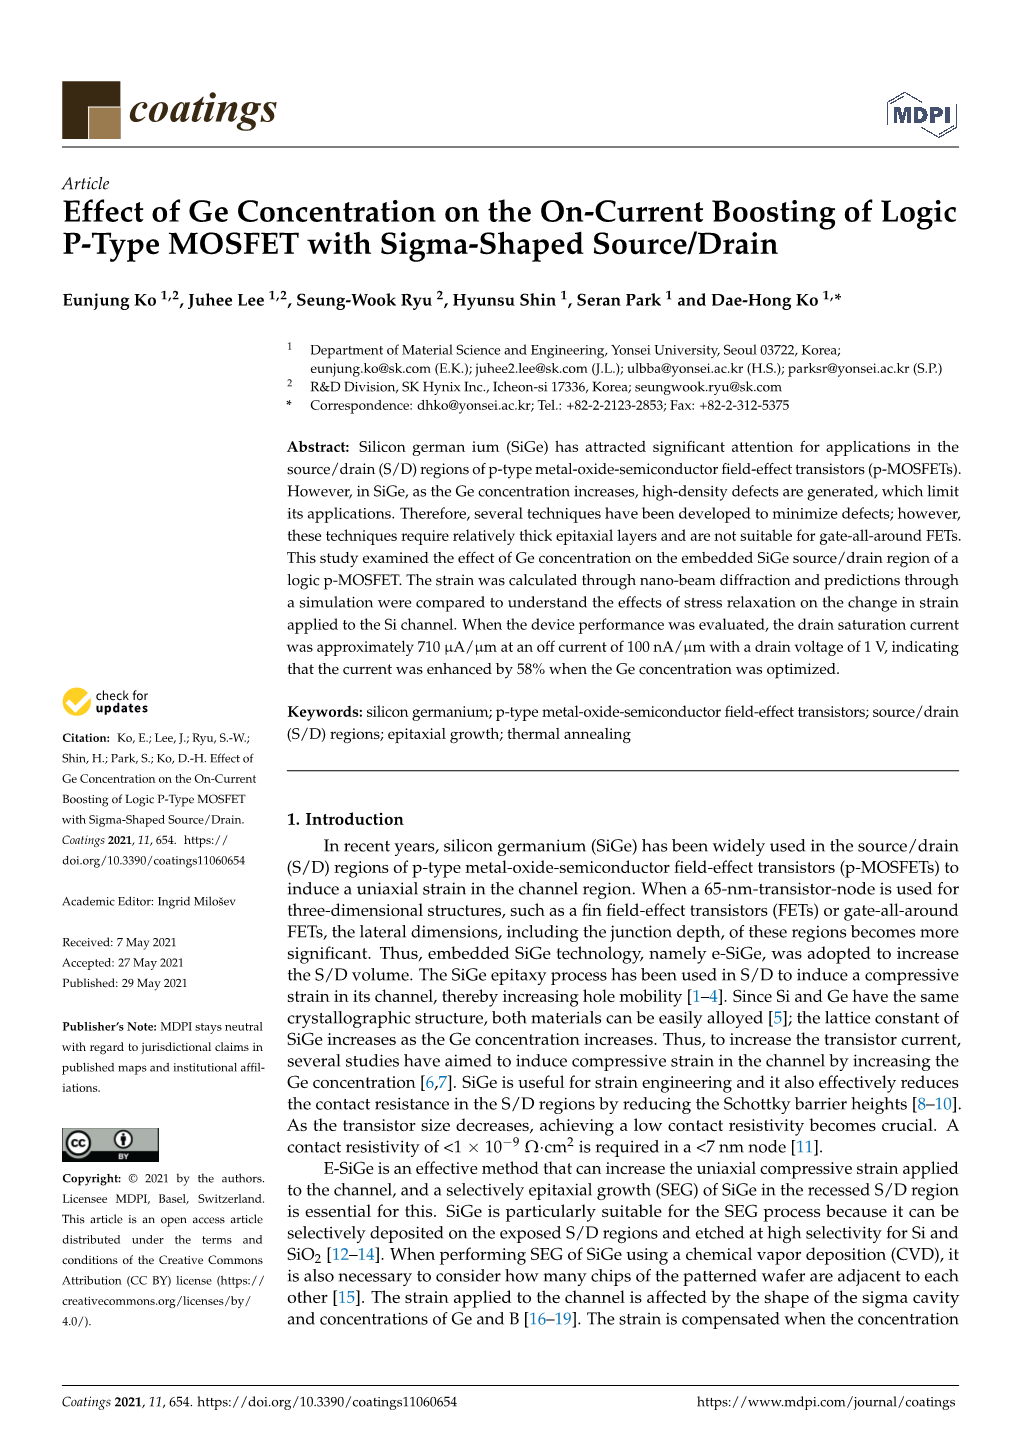 Effect of Ge Concentration on the On-Current Boosting of Logic P-Type MOSFET with Sigma-Shaped Source/Drain